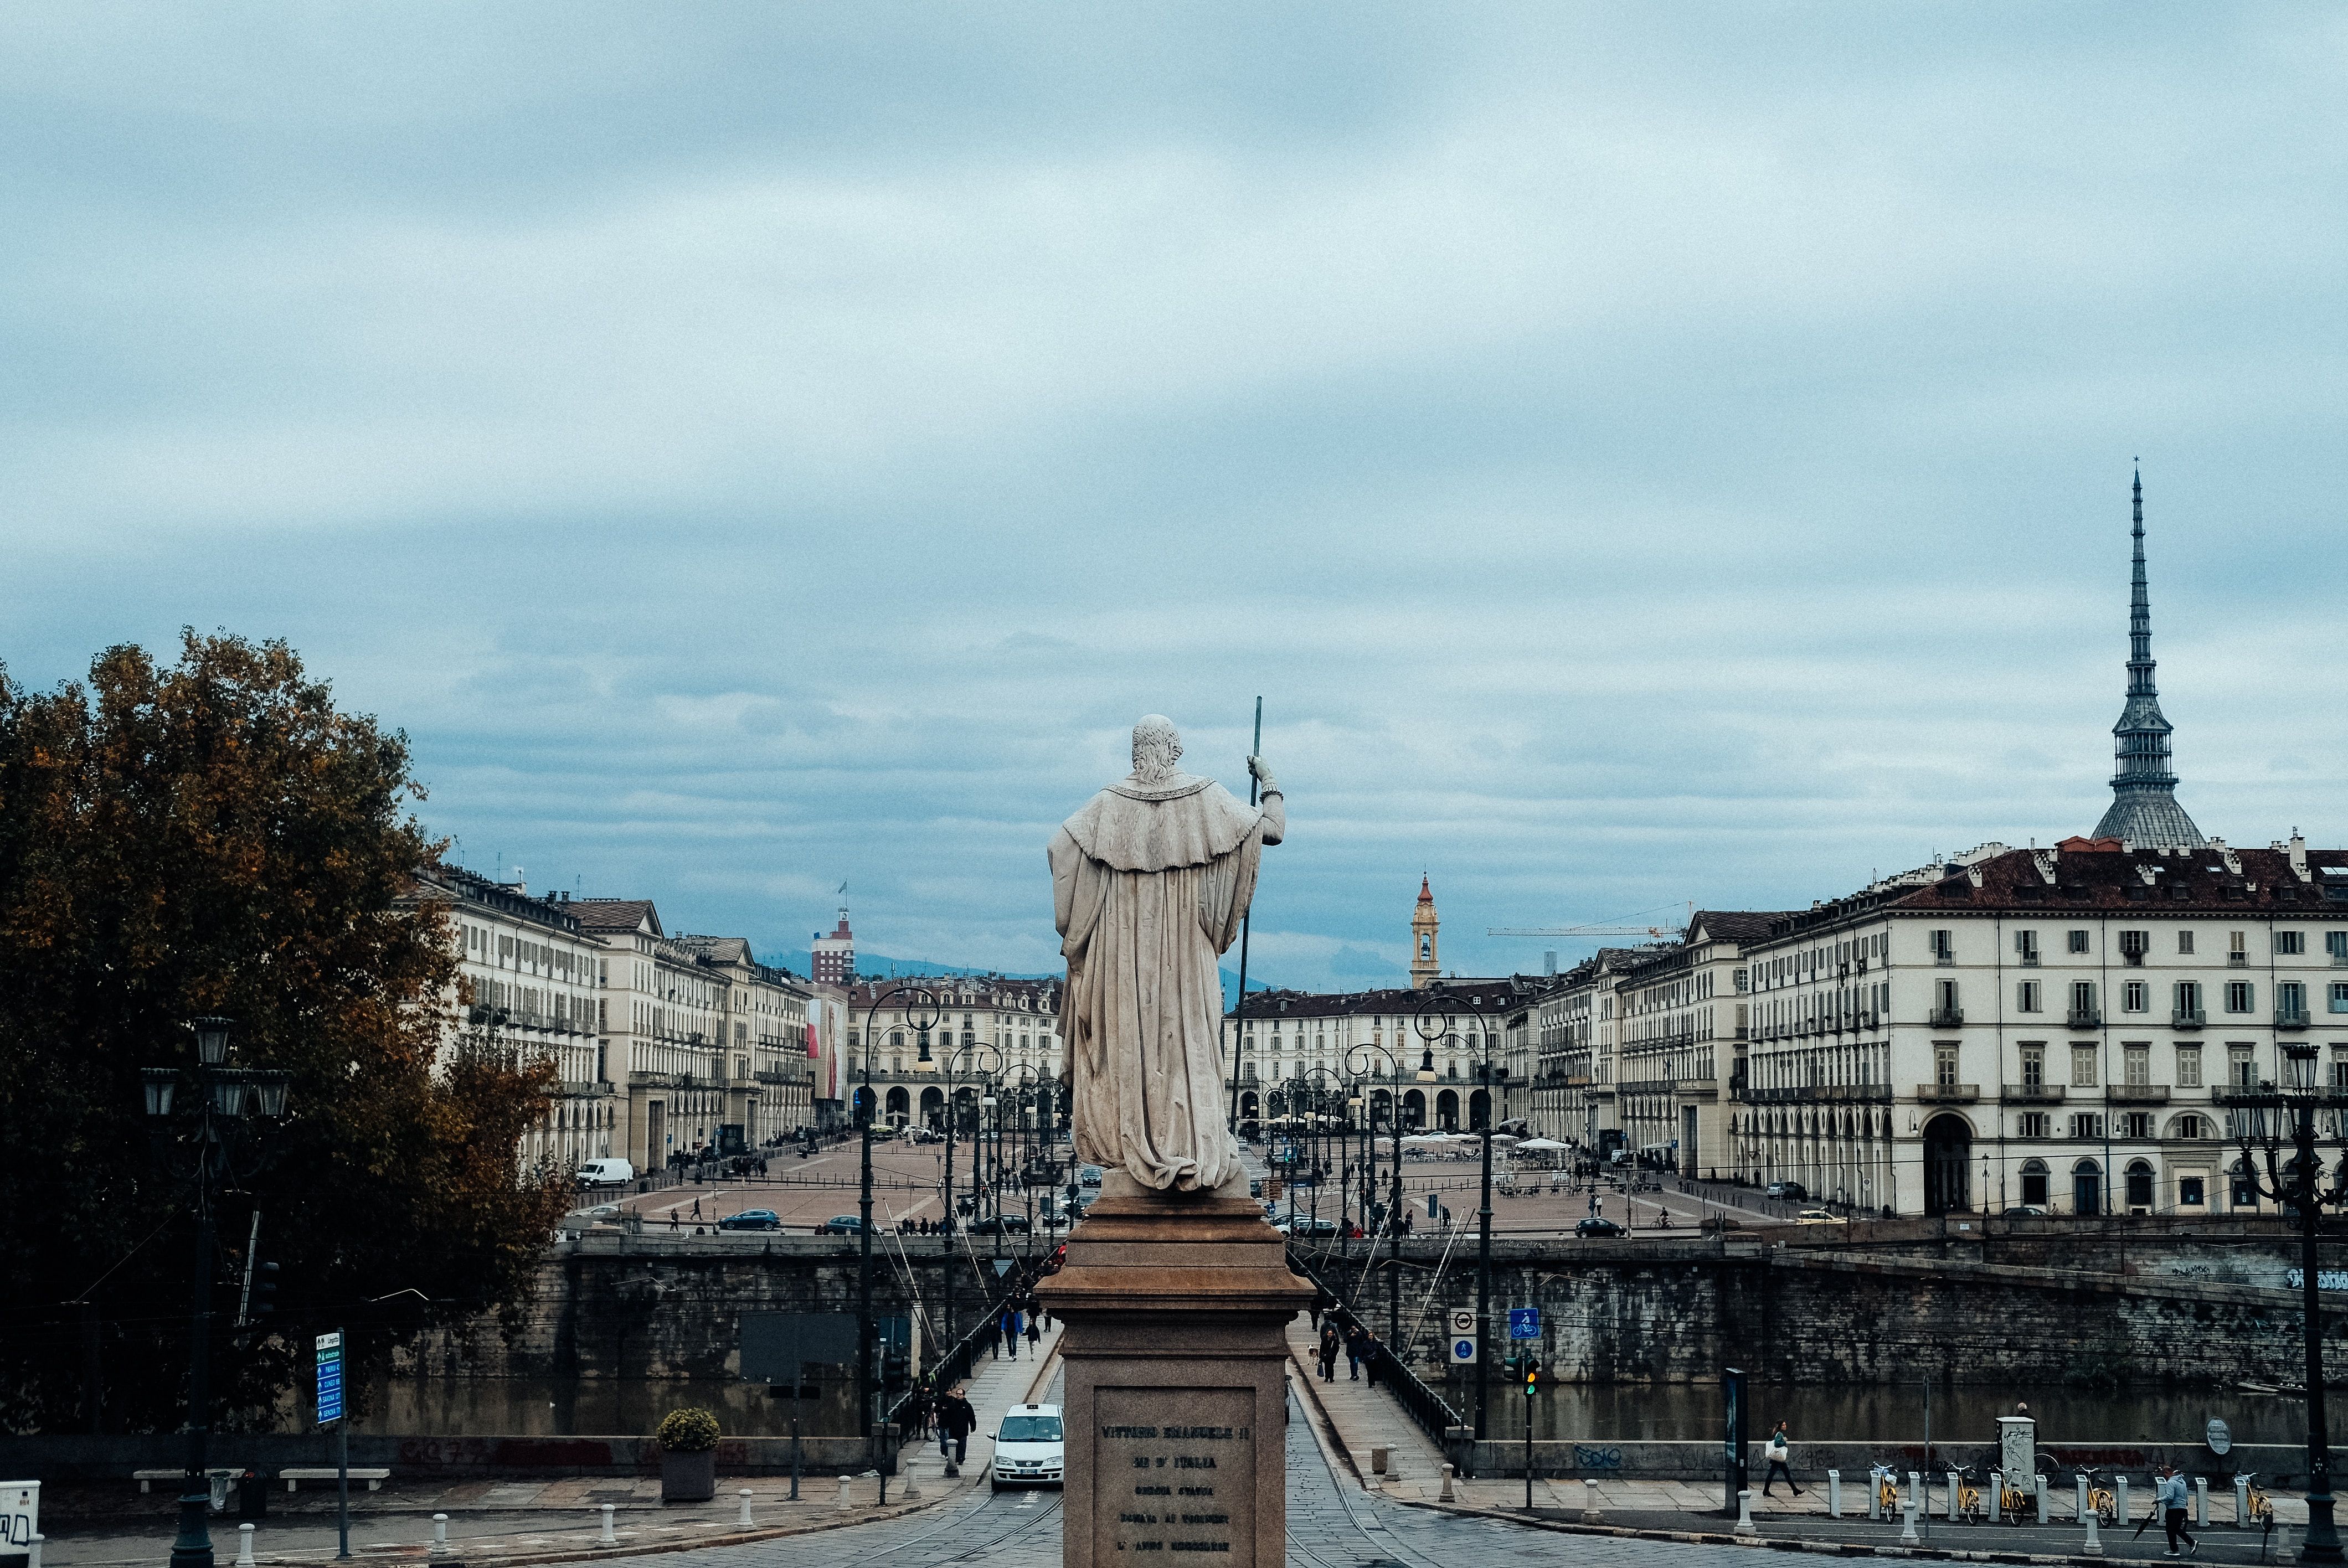 White statue in foreground with city 